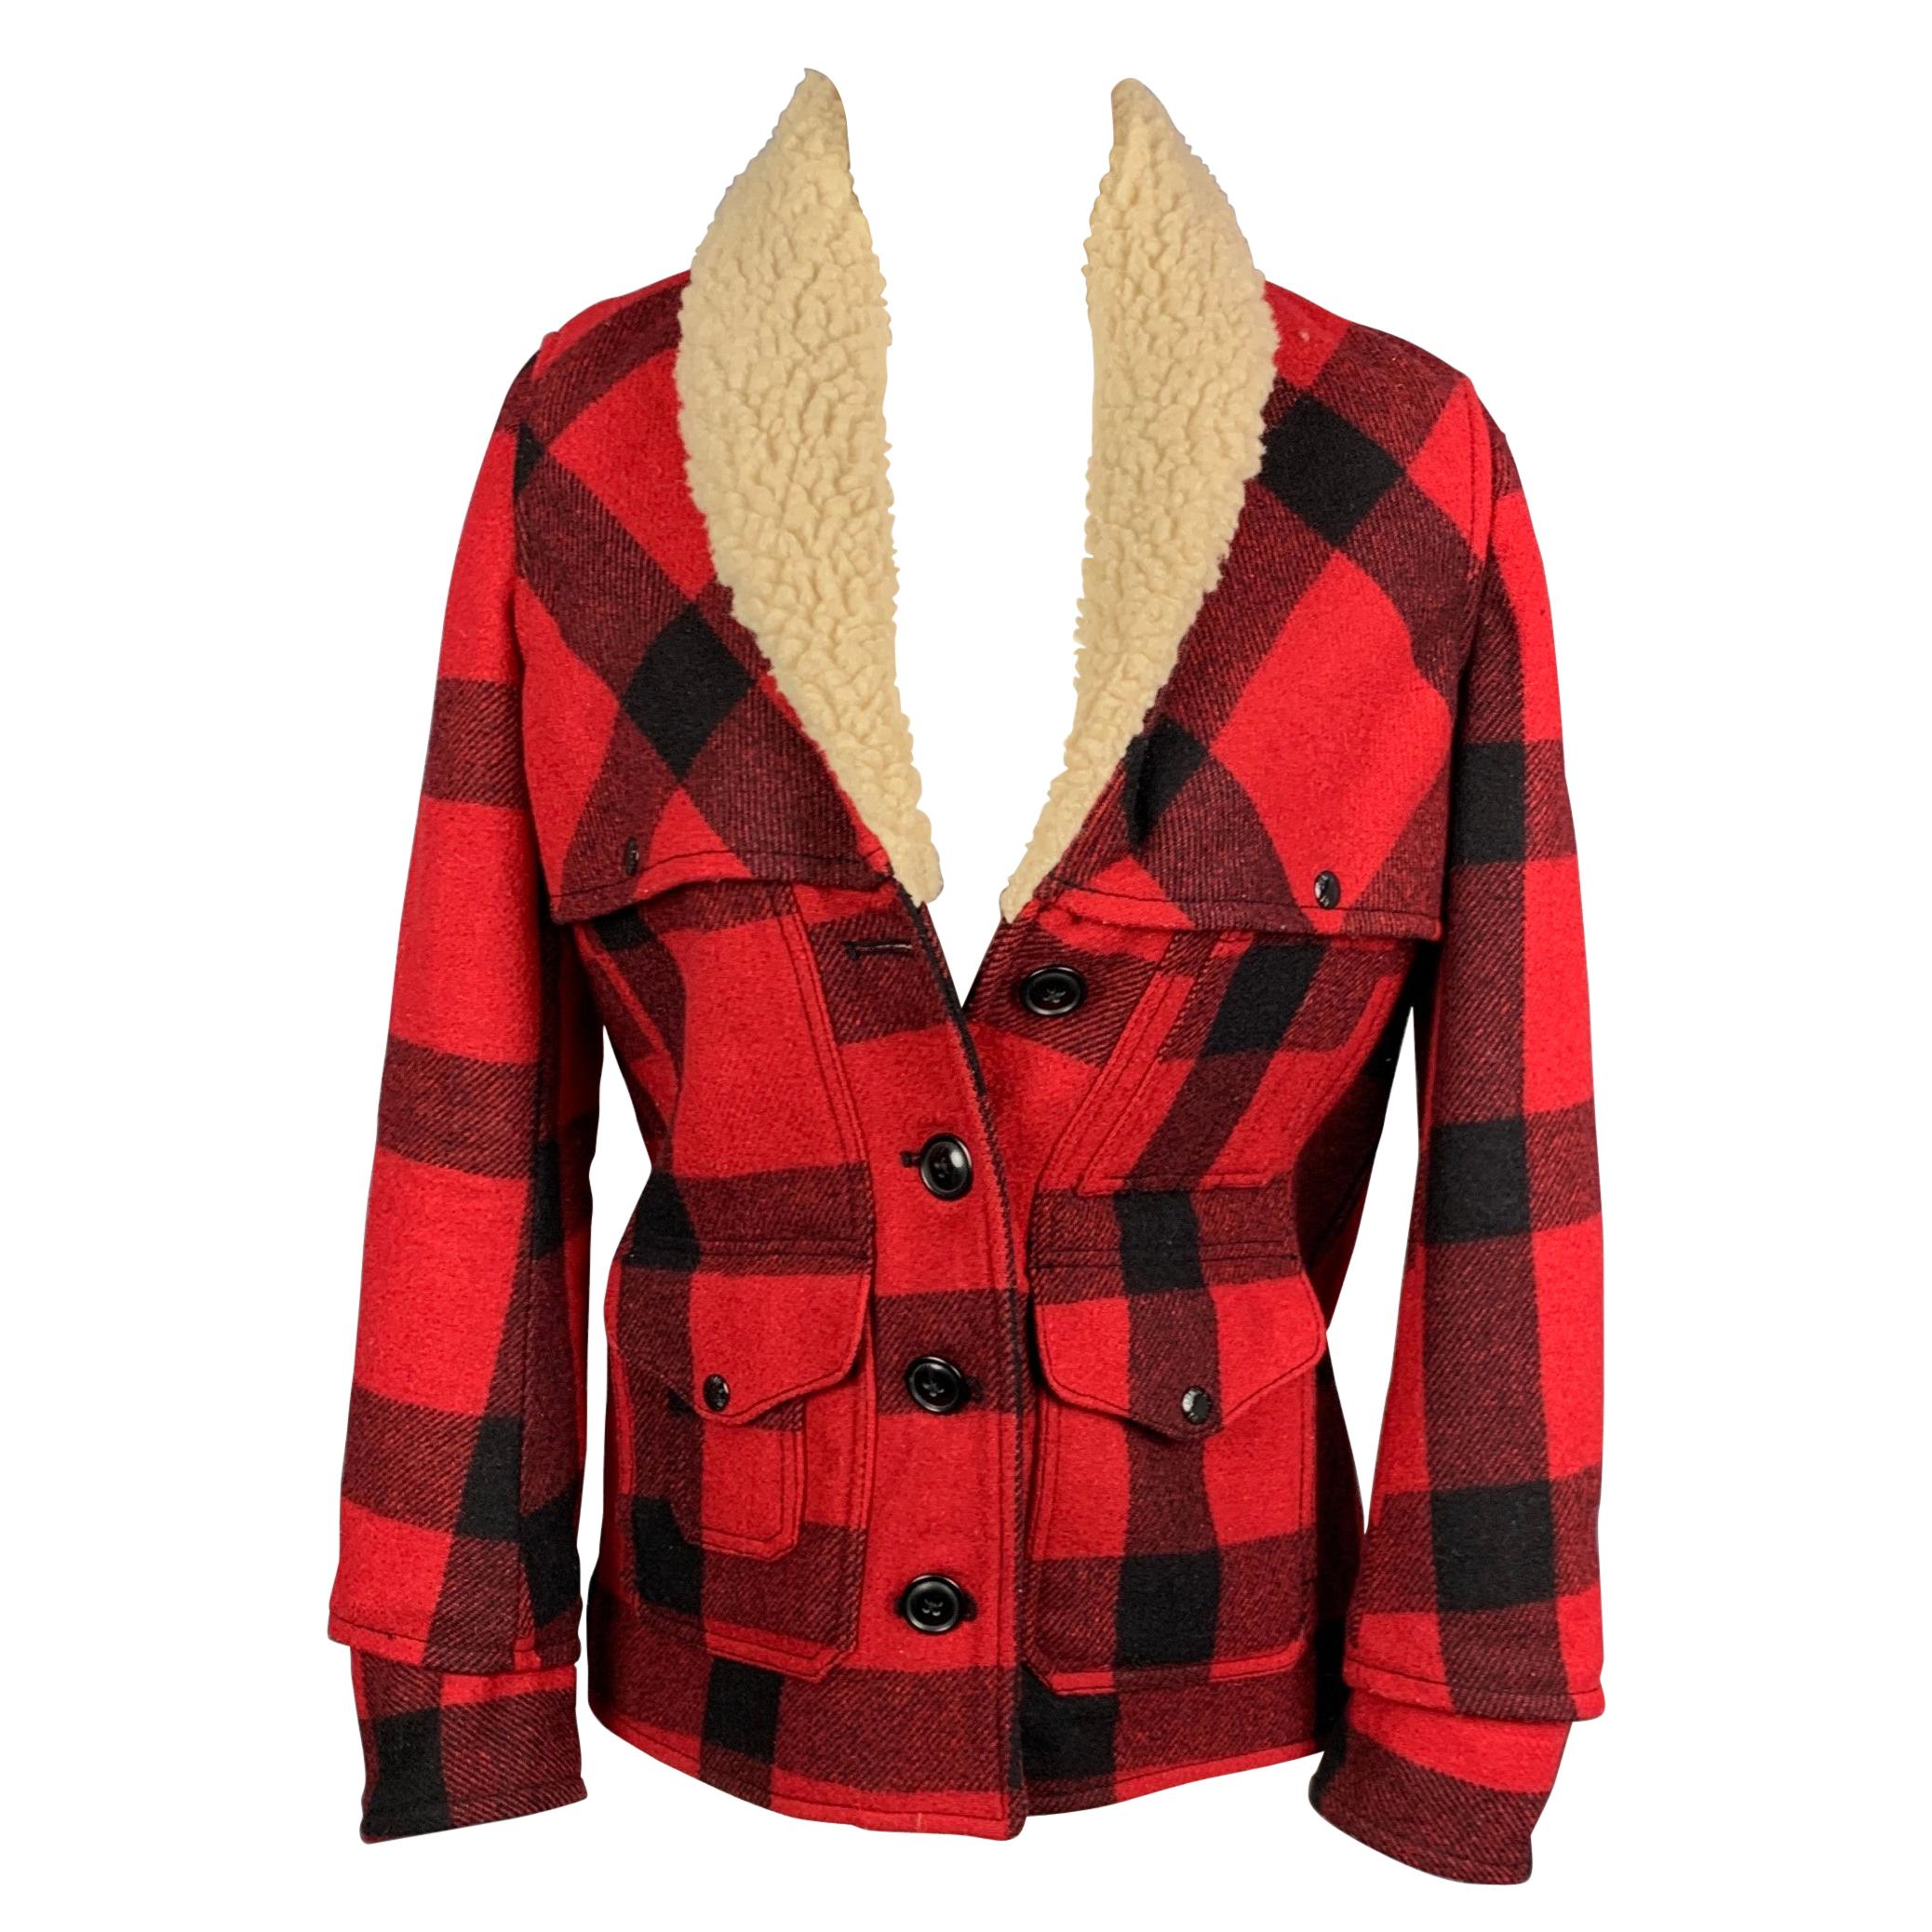 Buffalo Check Cropped Sleeveless Jacket Vintage Flannel Vest Faux Shearling Lining Winter Red and Black Cropped Jacket